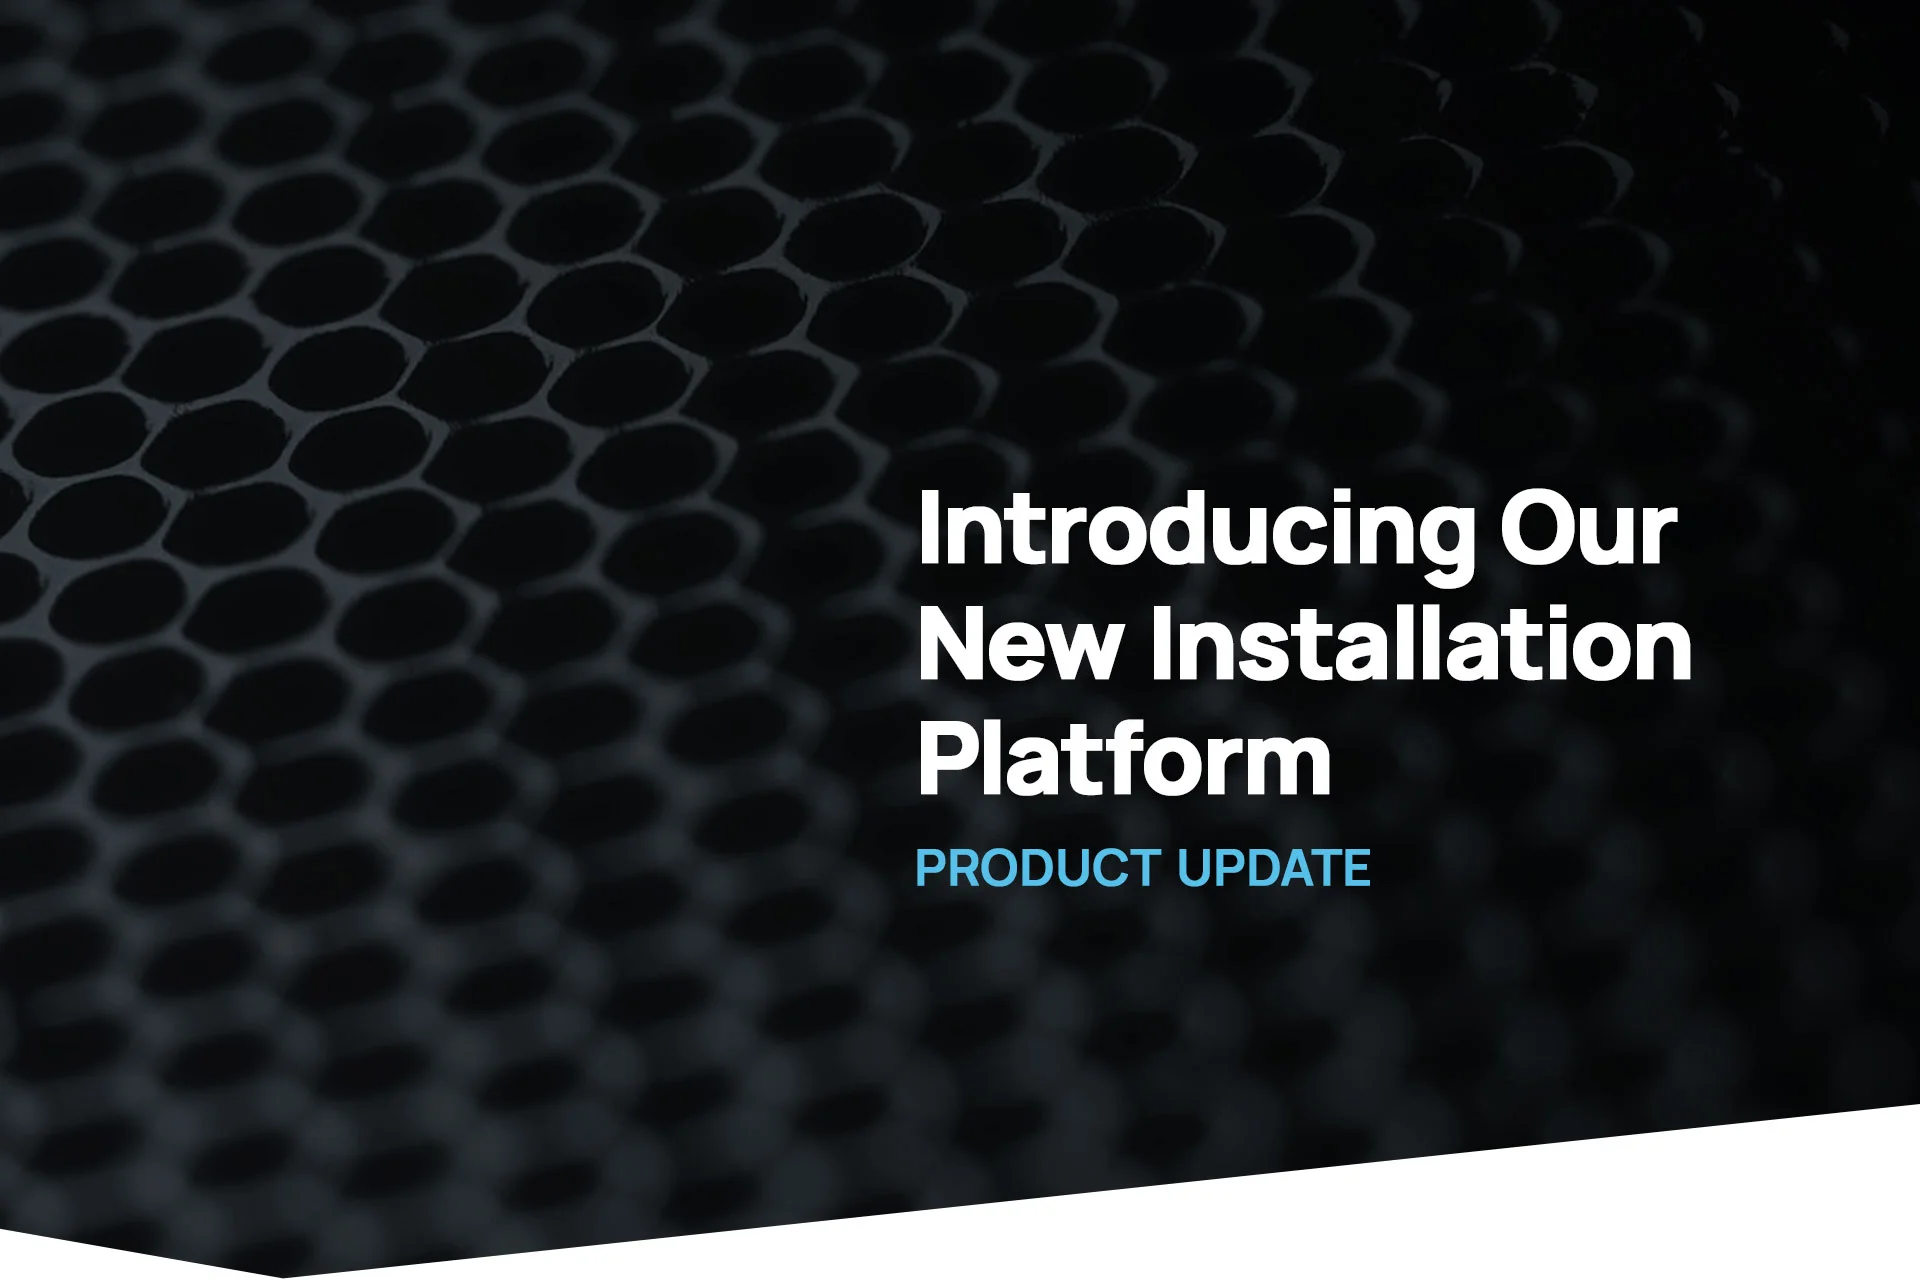 Introducing our New Installation Platform